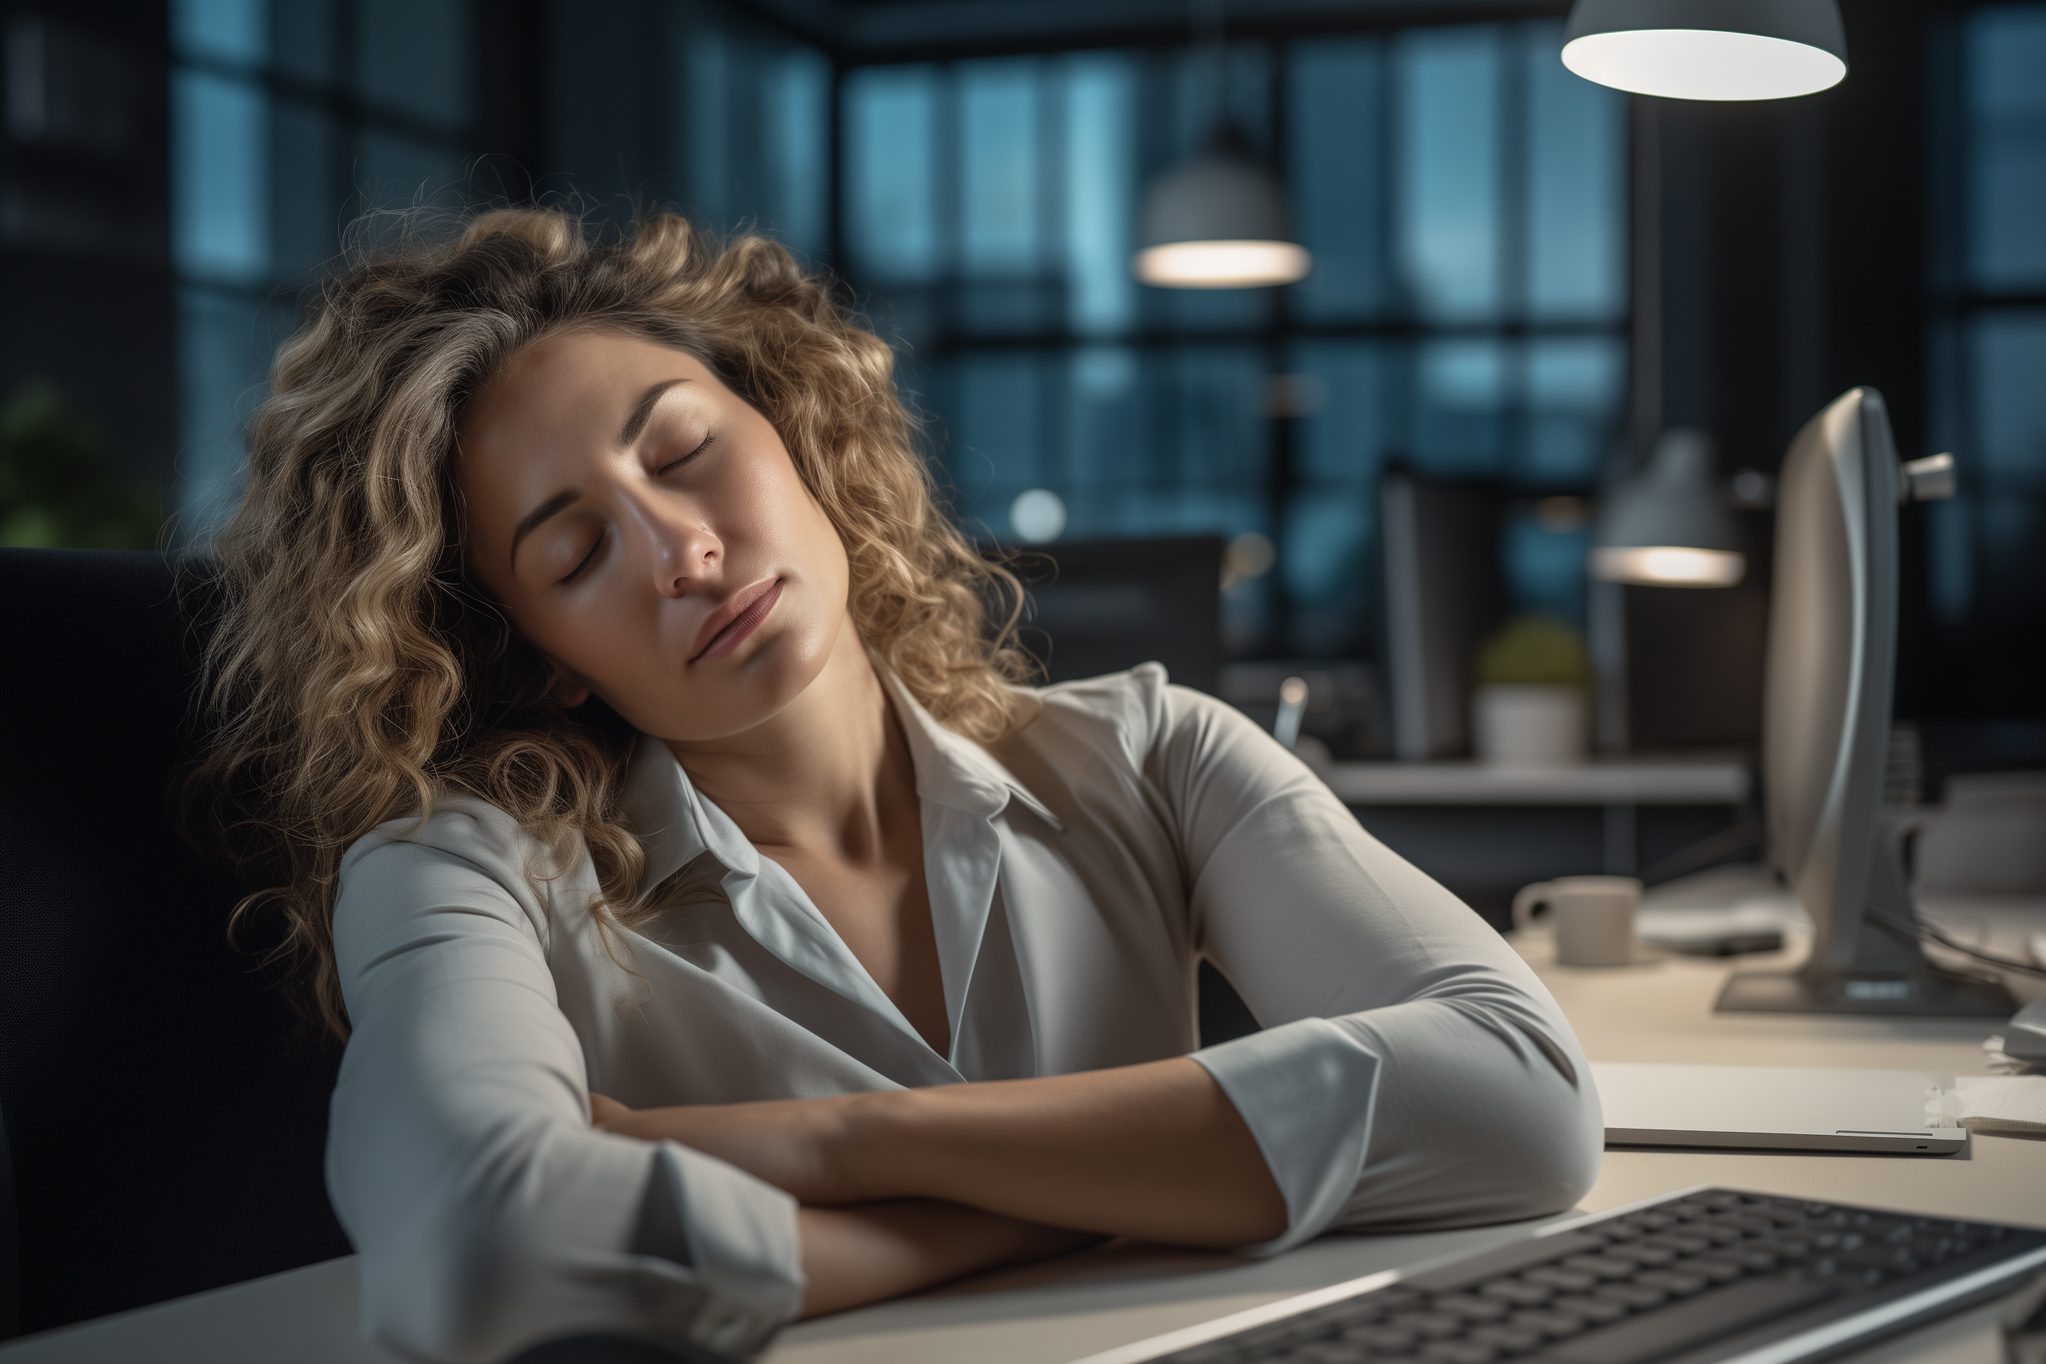 Hypersomnia Uncovered: What’s Making You So Sleepy?